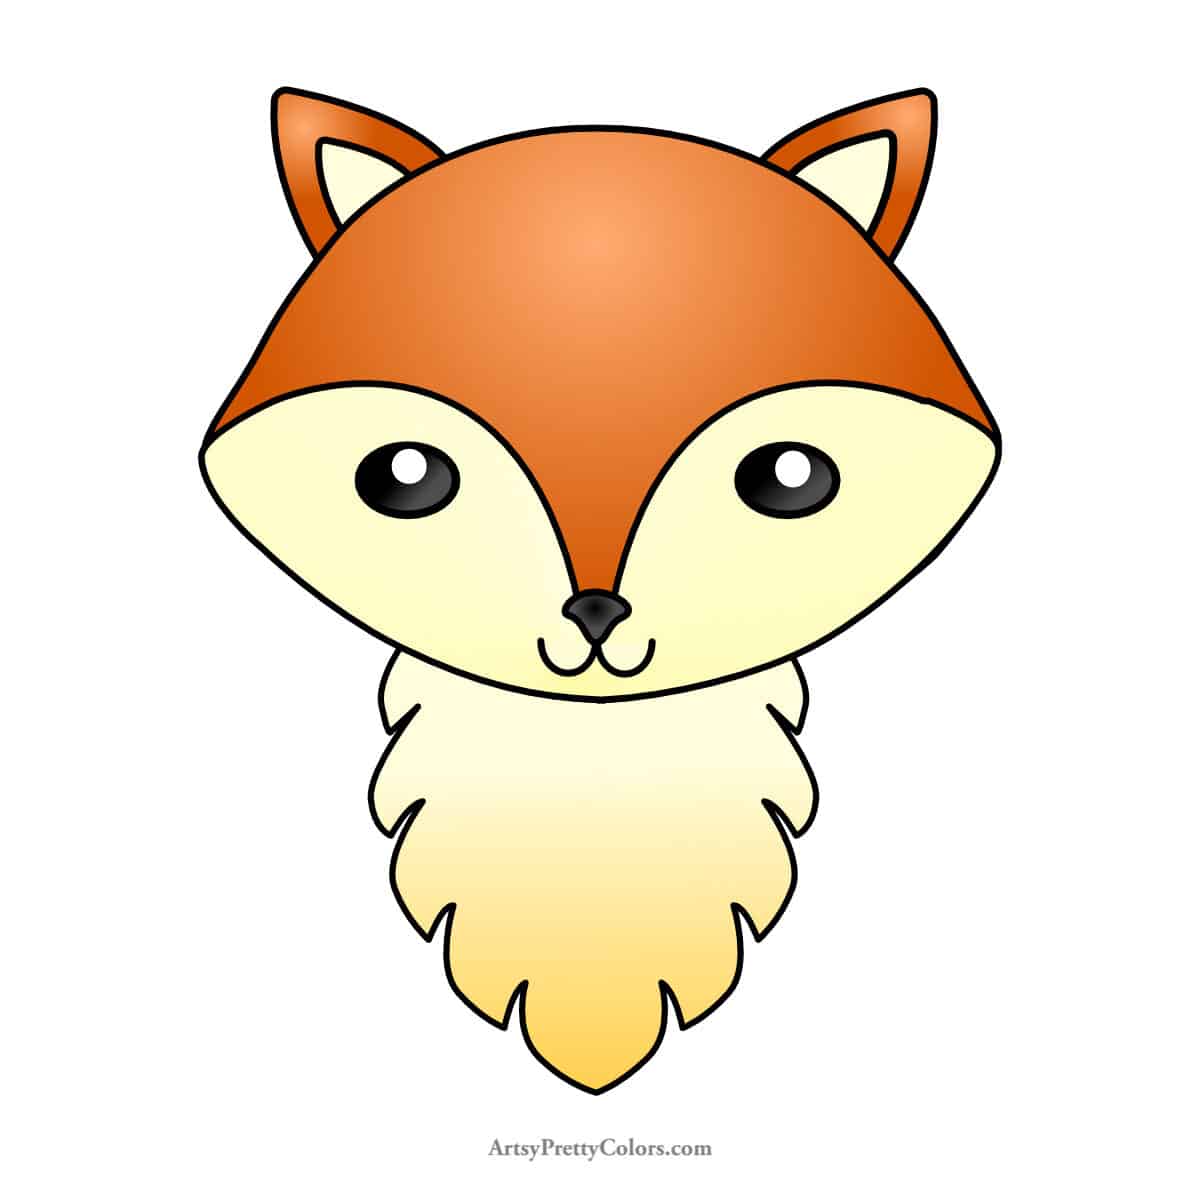 a colored in, finished drawing of a fox head.